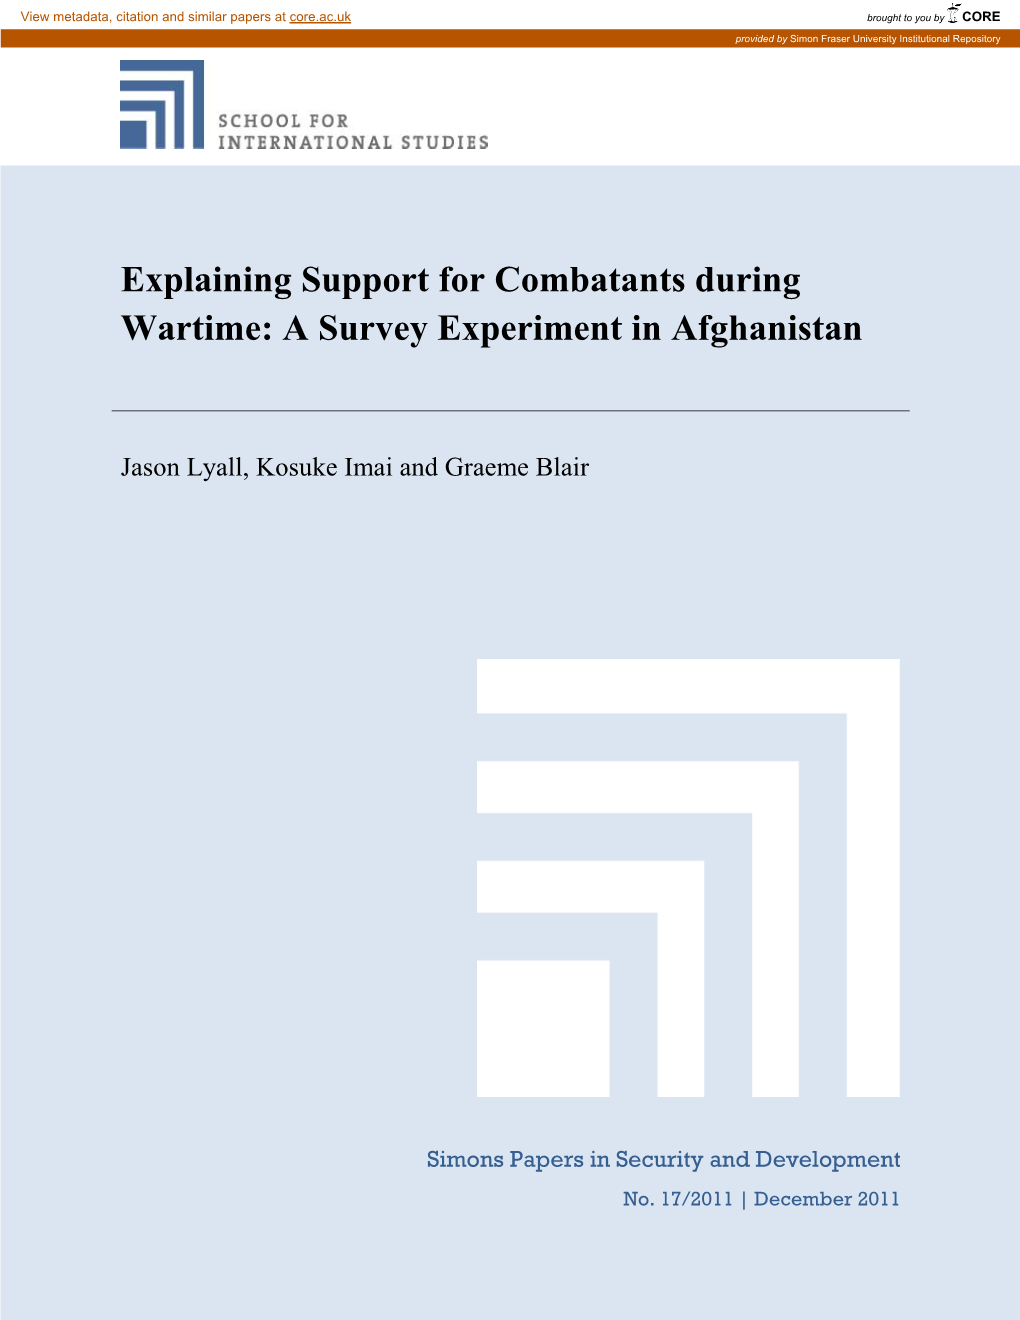 Explaining Support for Combatants During Wartime: a Survey Experiment in Afghanistan